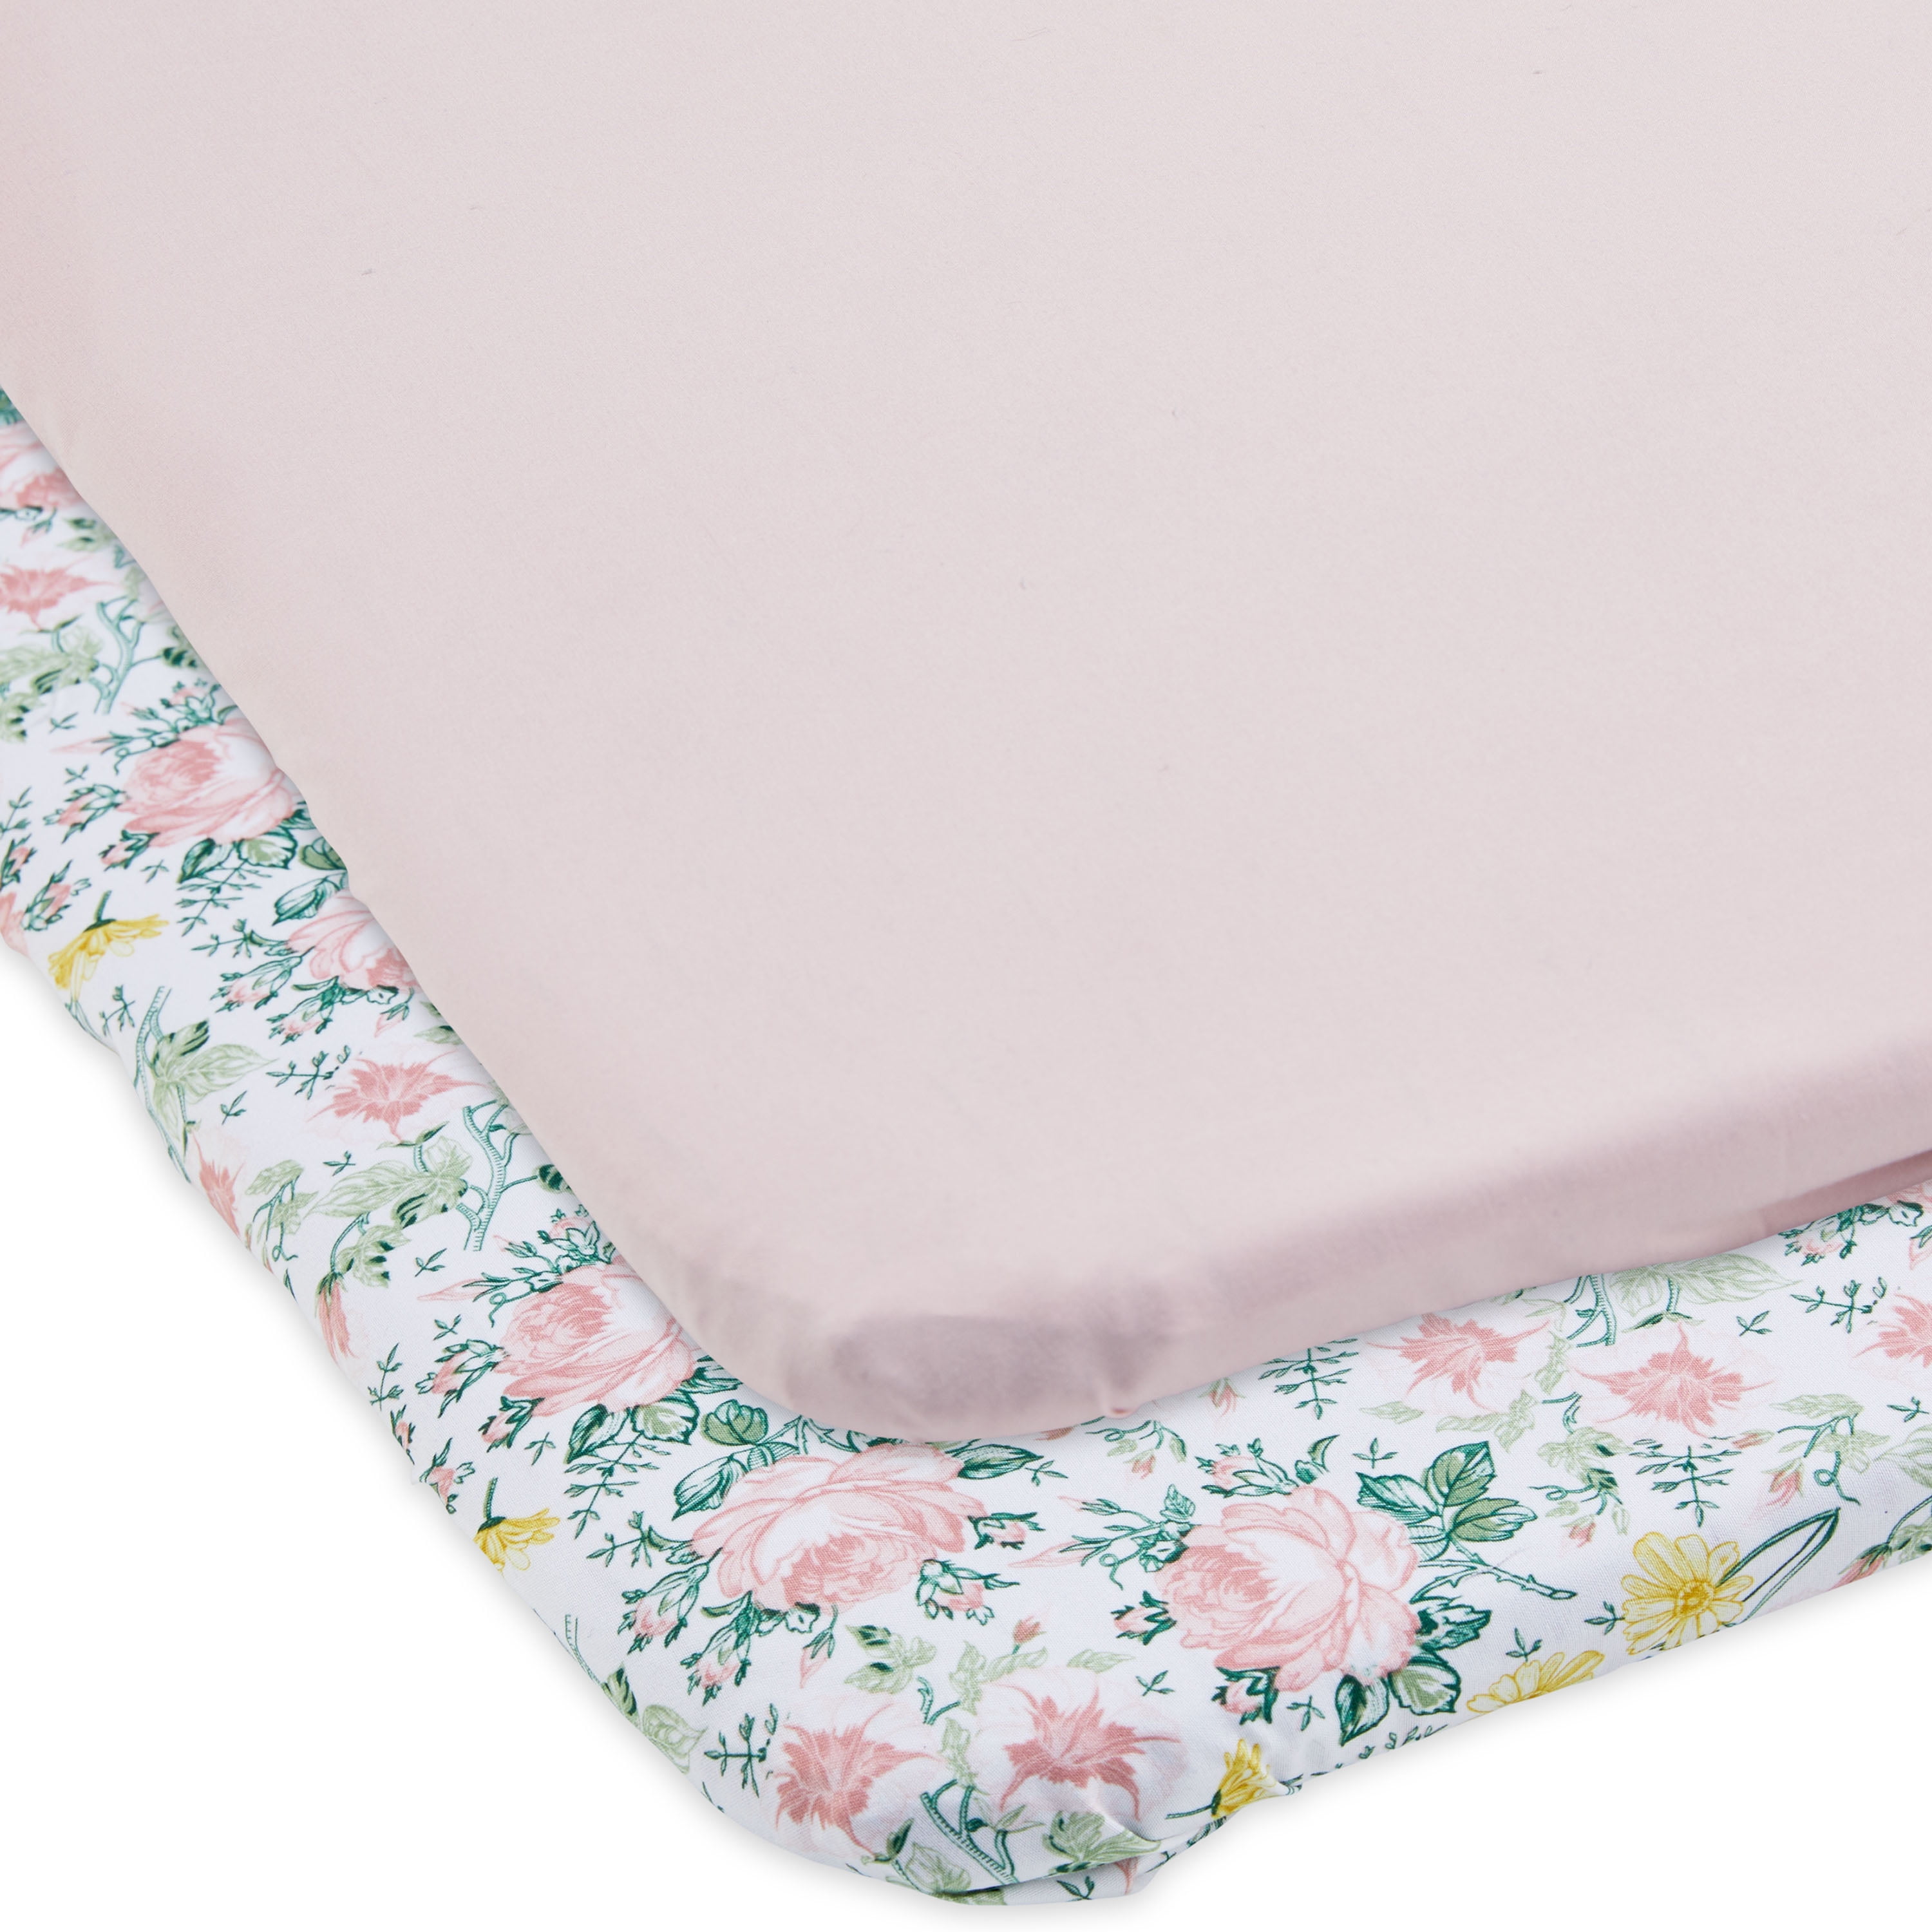 Parent's Choice Polyester Fitted Playard Sheet for Baby Girls, Floral, Pink, 2 Pack